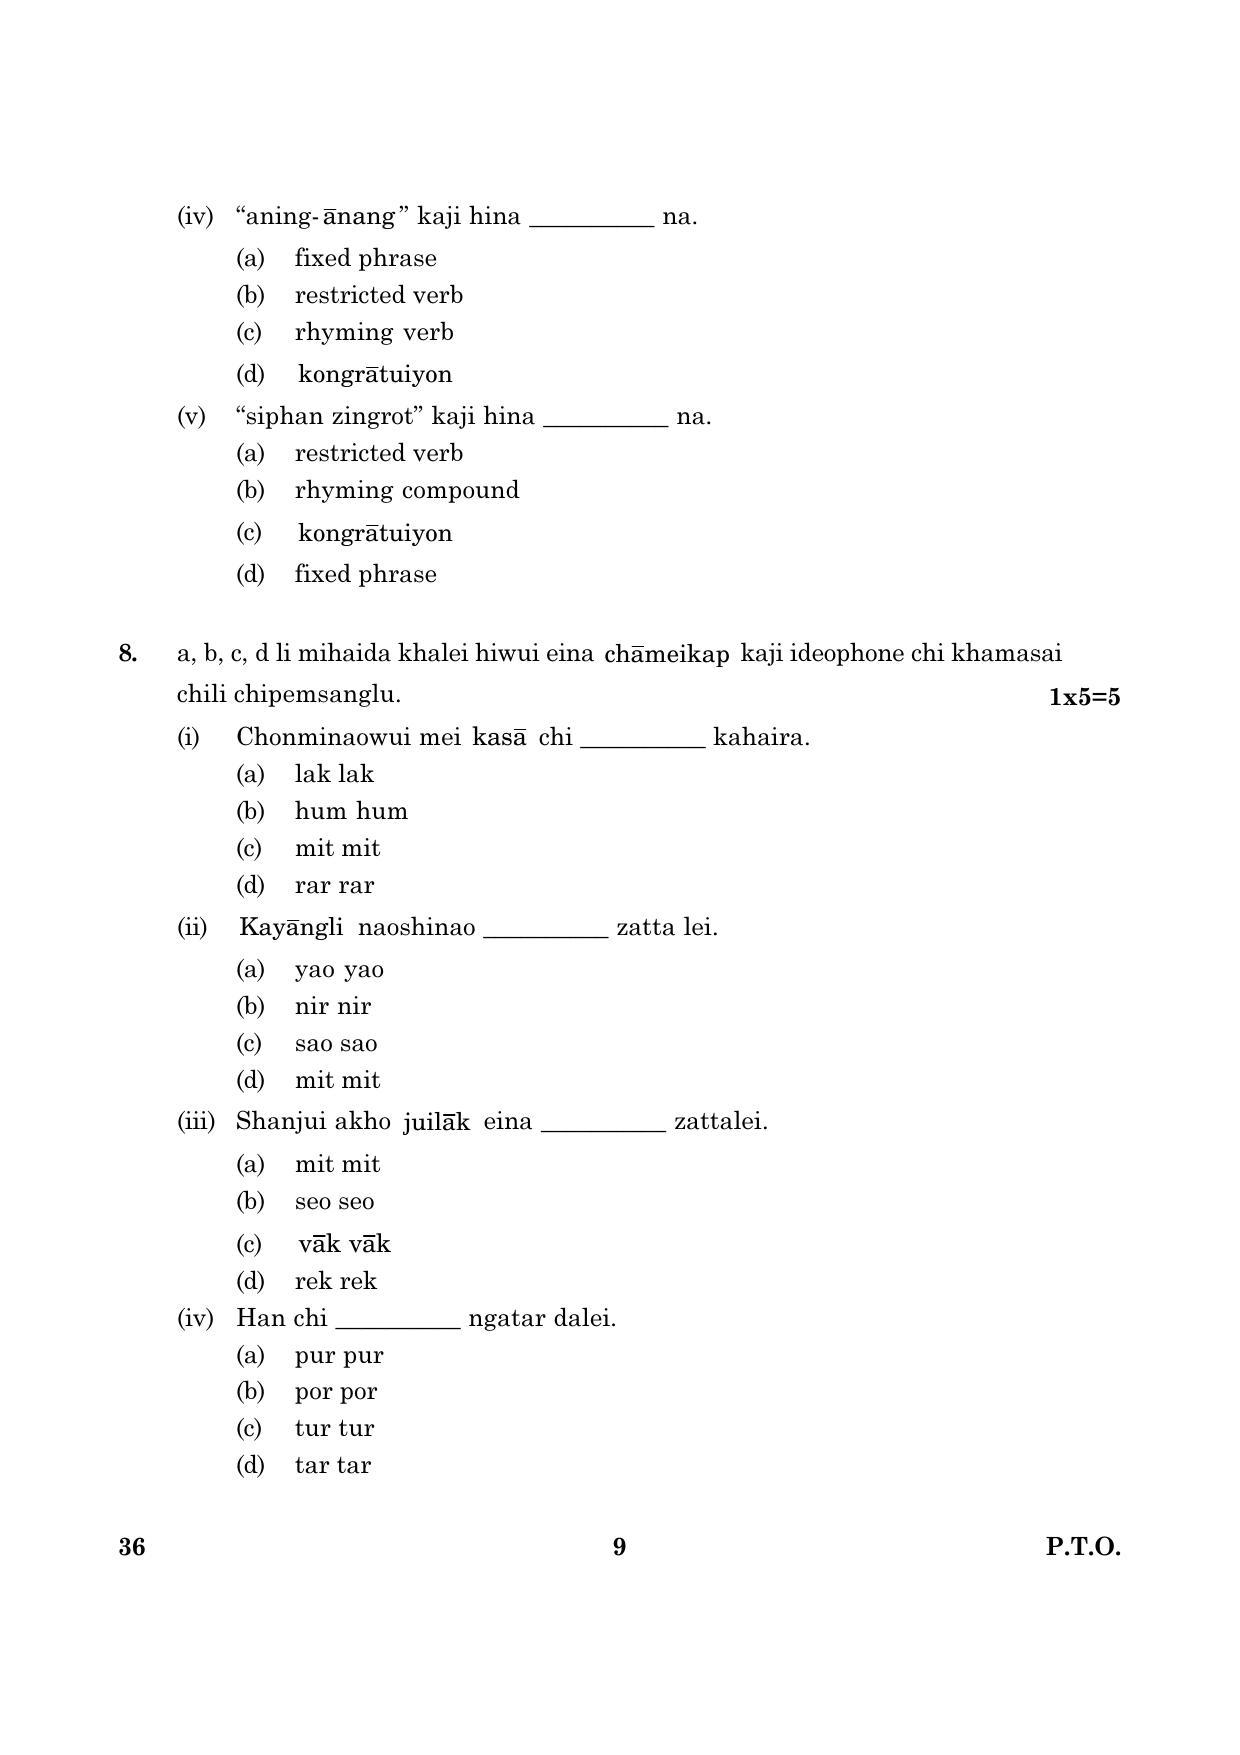 CBSE Class 10 036 Tangkhul (English) 2016 Question Paper - Page 9